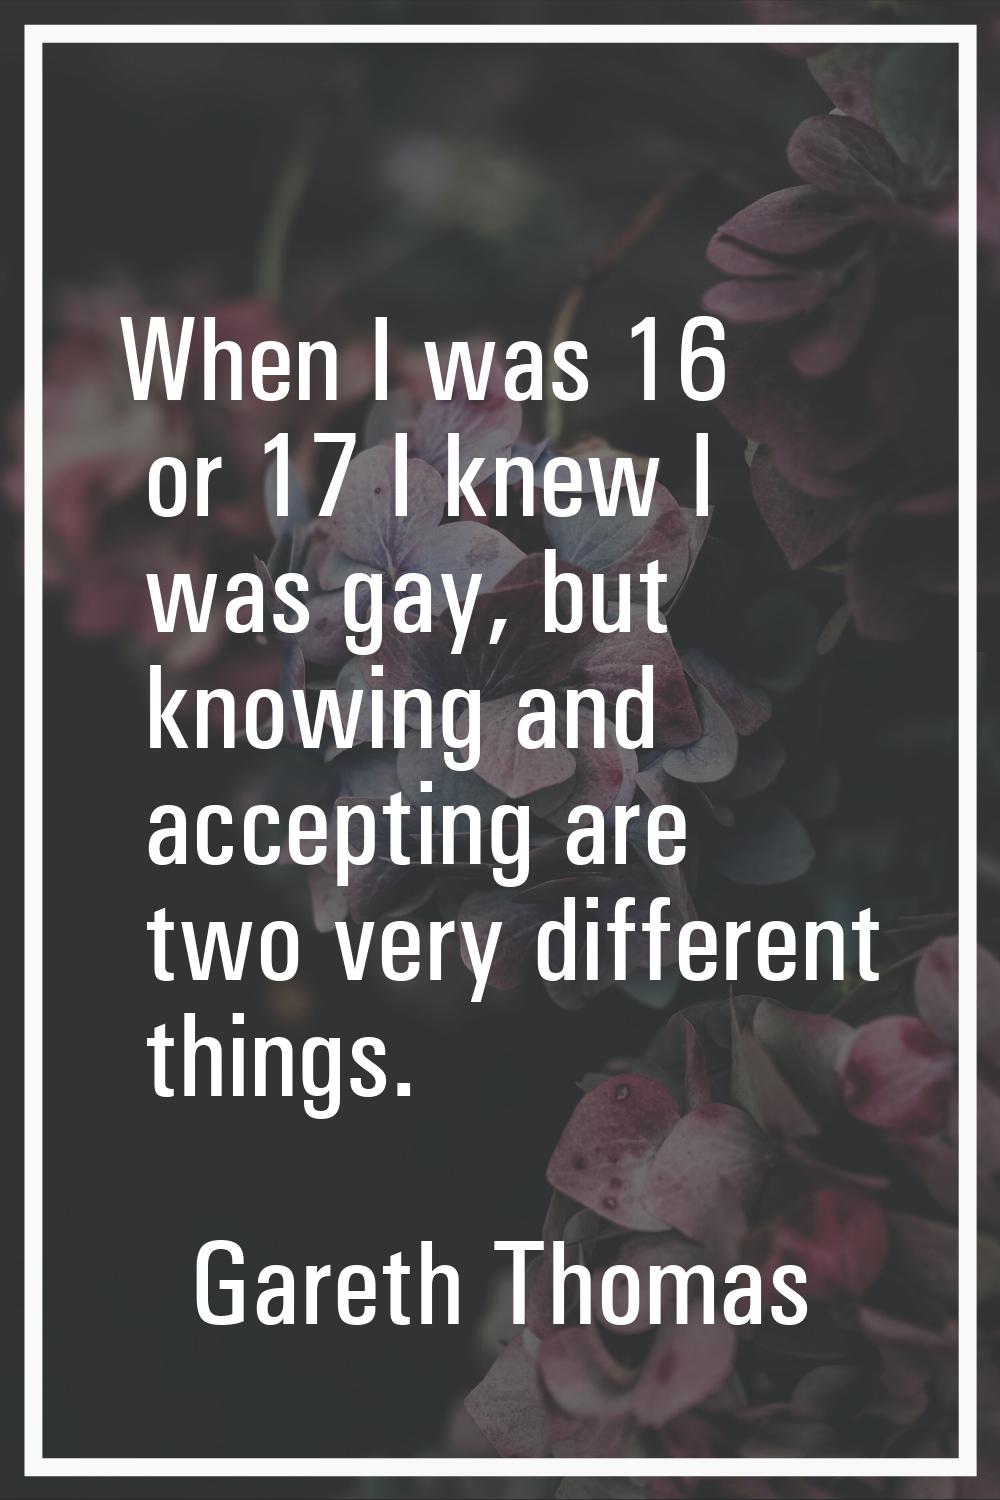 When I was 16 or 17 I knew I was gay, but knowing and accepting are two very different things.